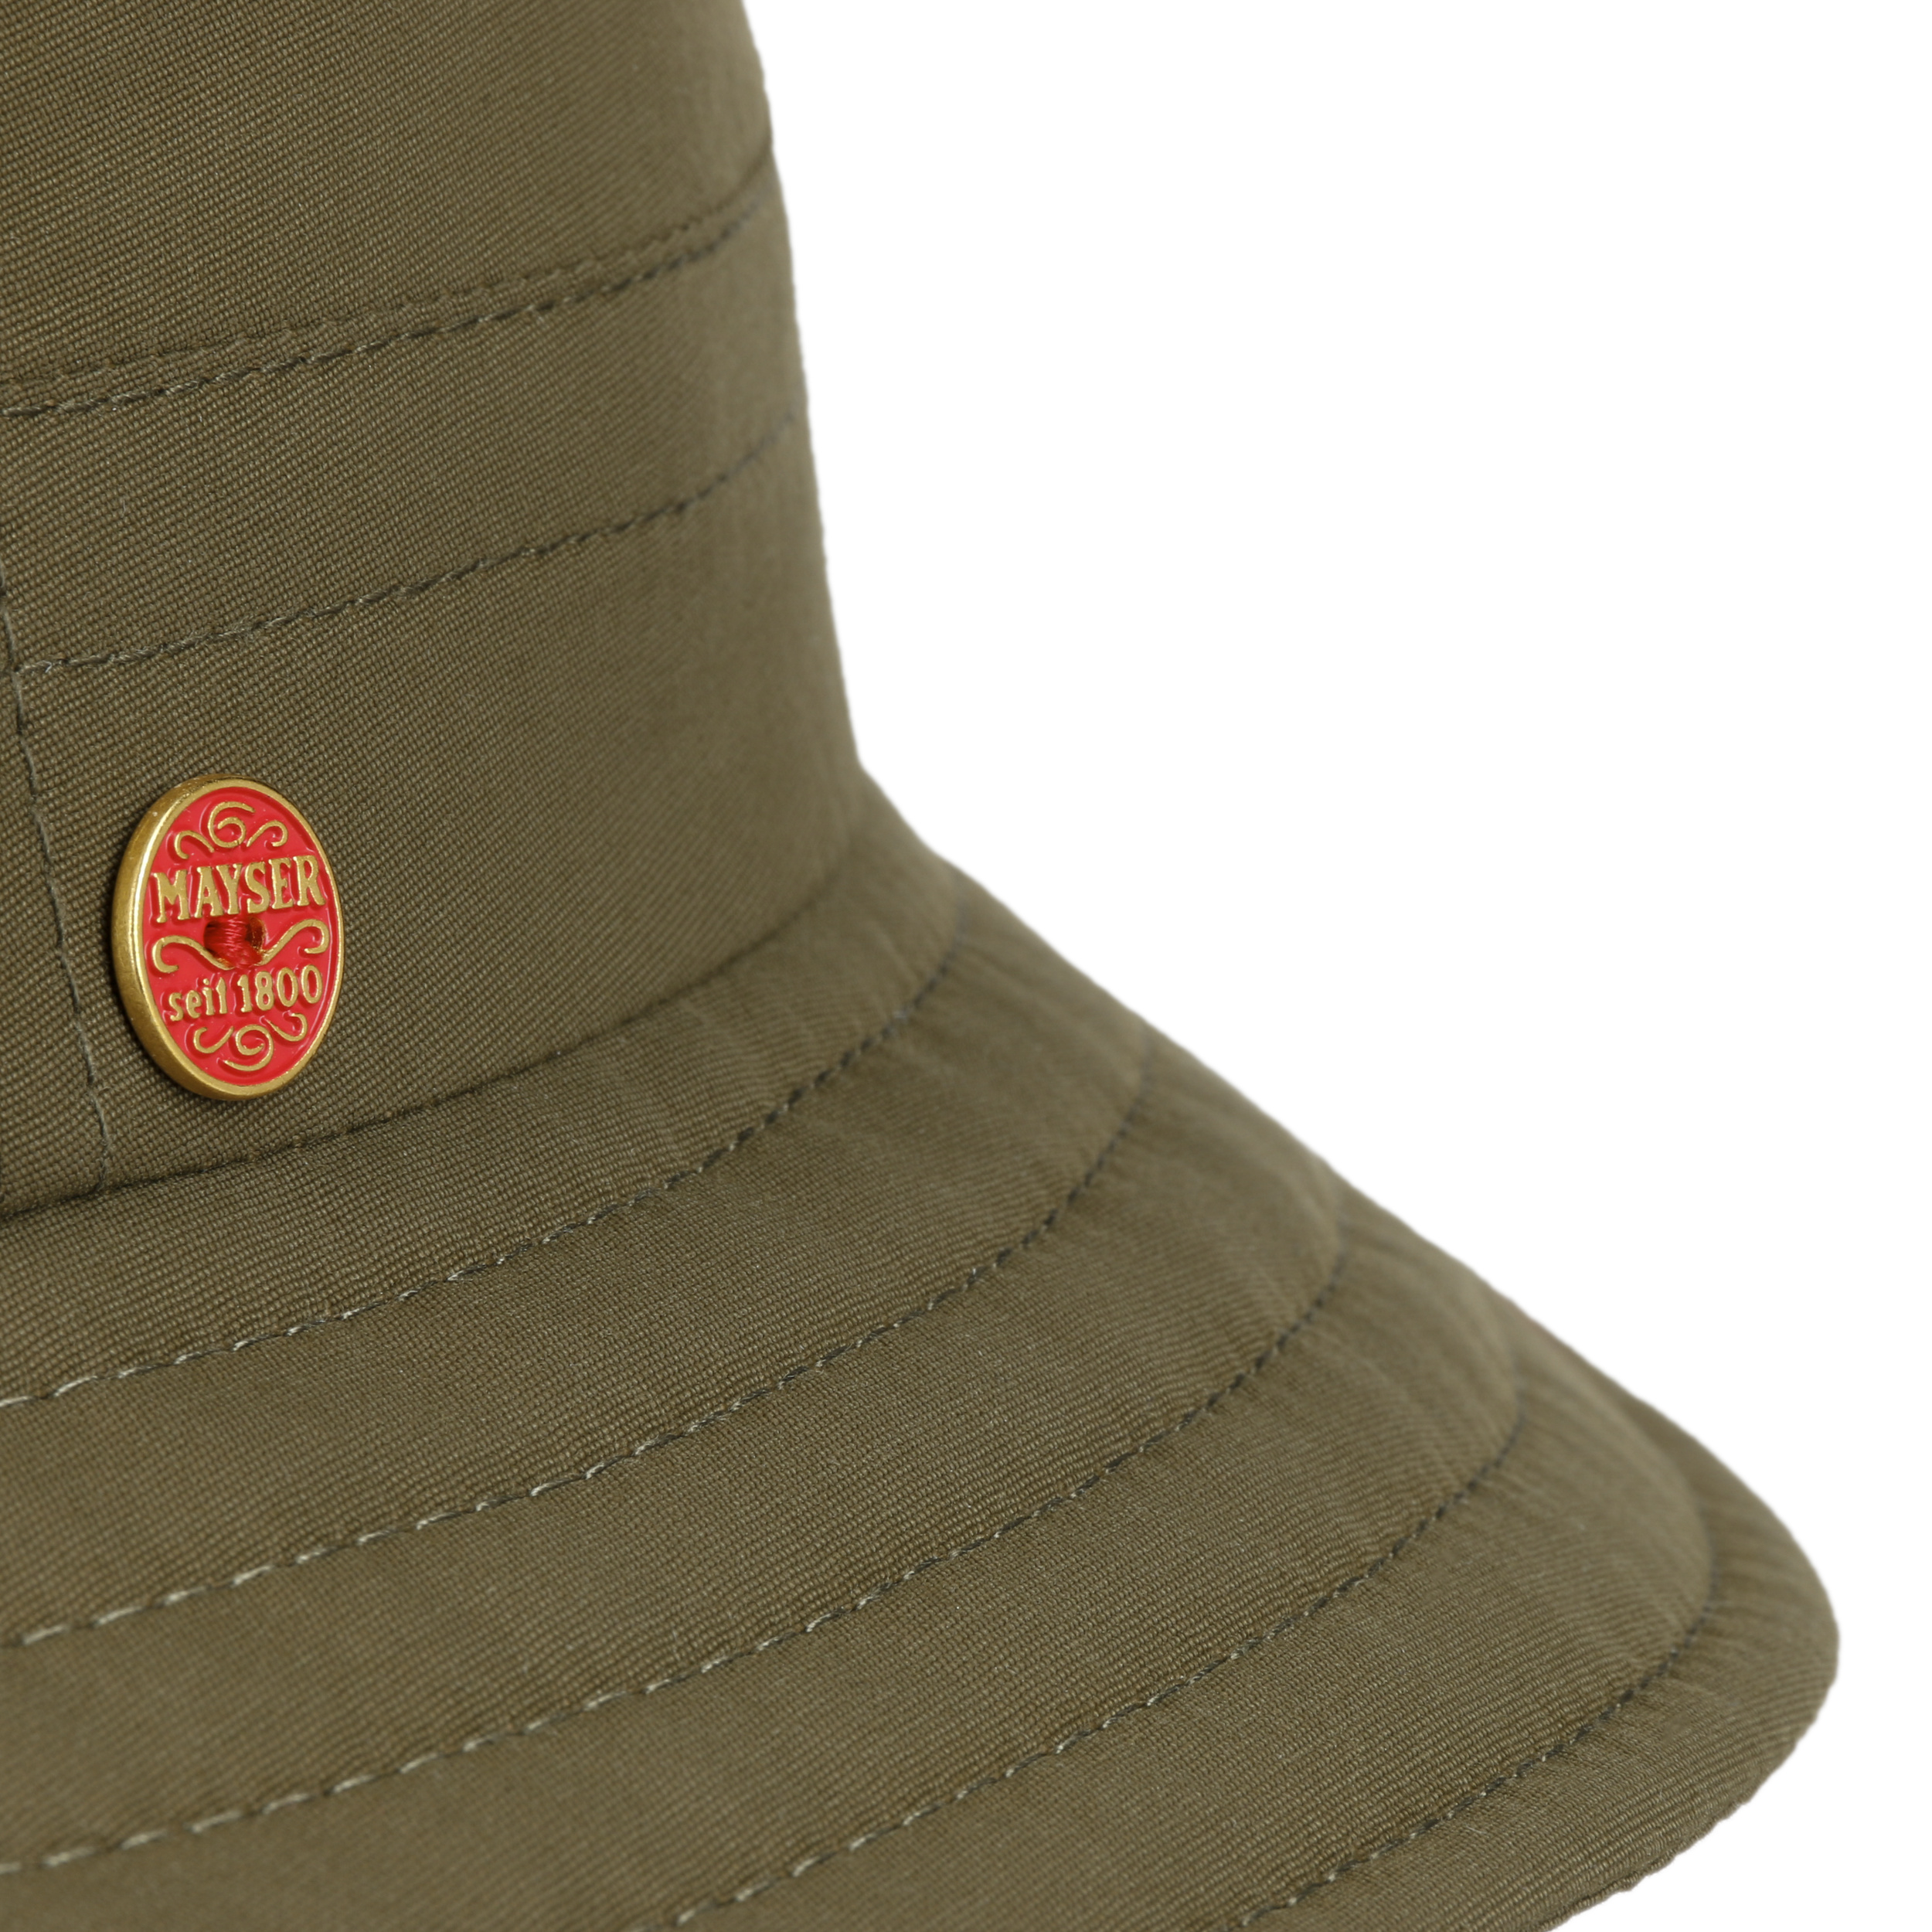 Protection UV € Hat by Mayser - Sun 72,95